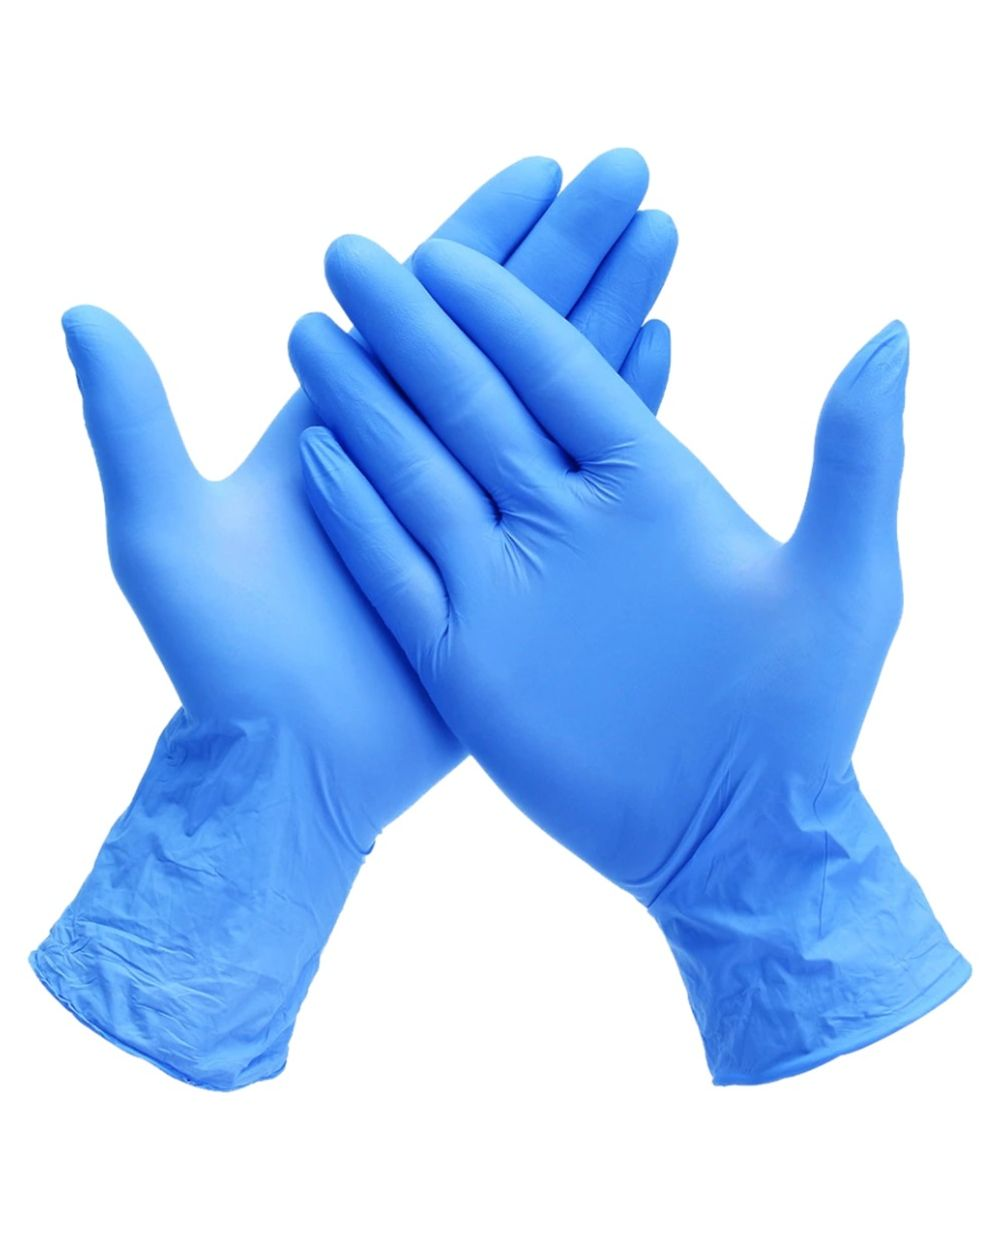 5 Myths about Protective Hand Glove